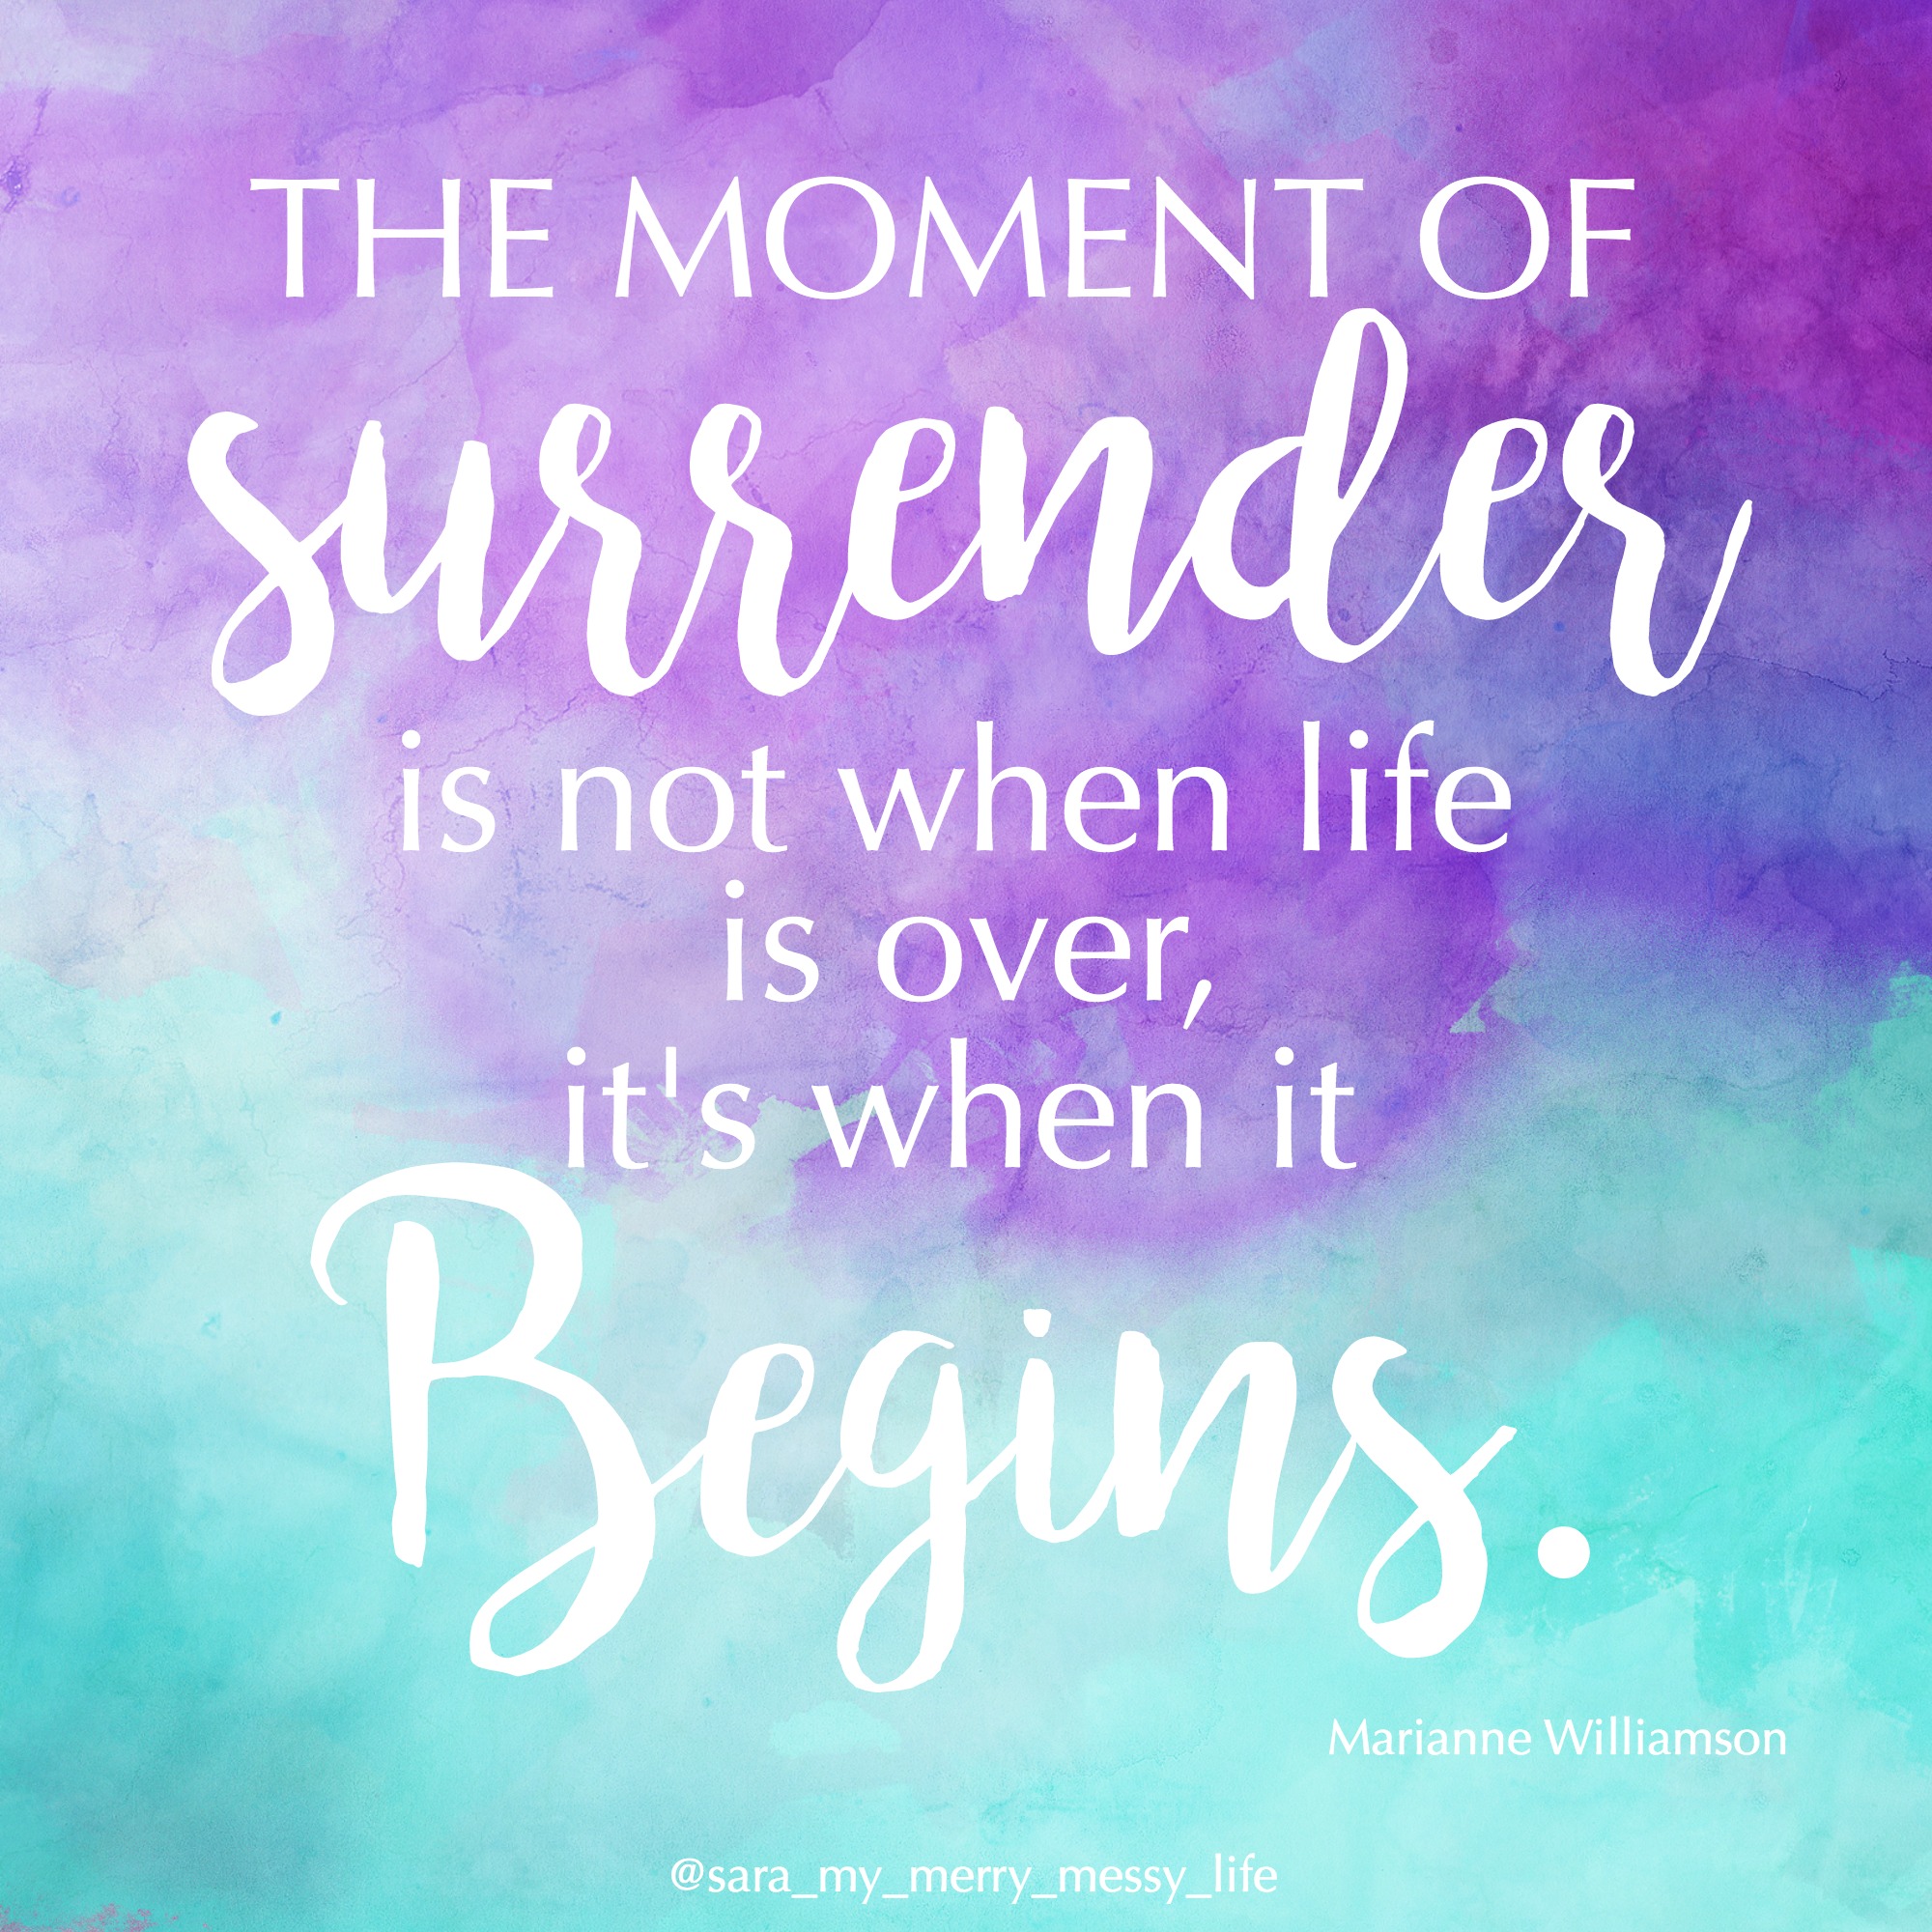 How to Let Go and Surrender